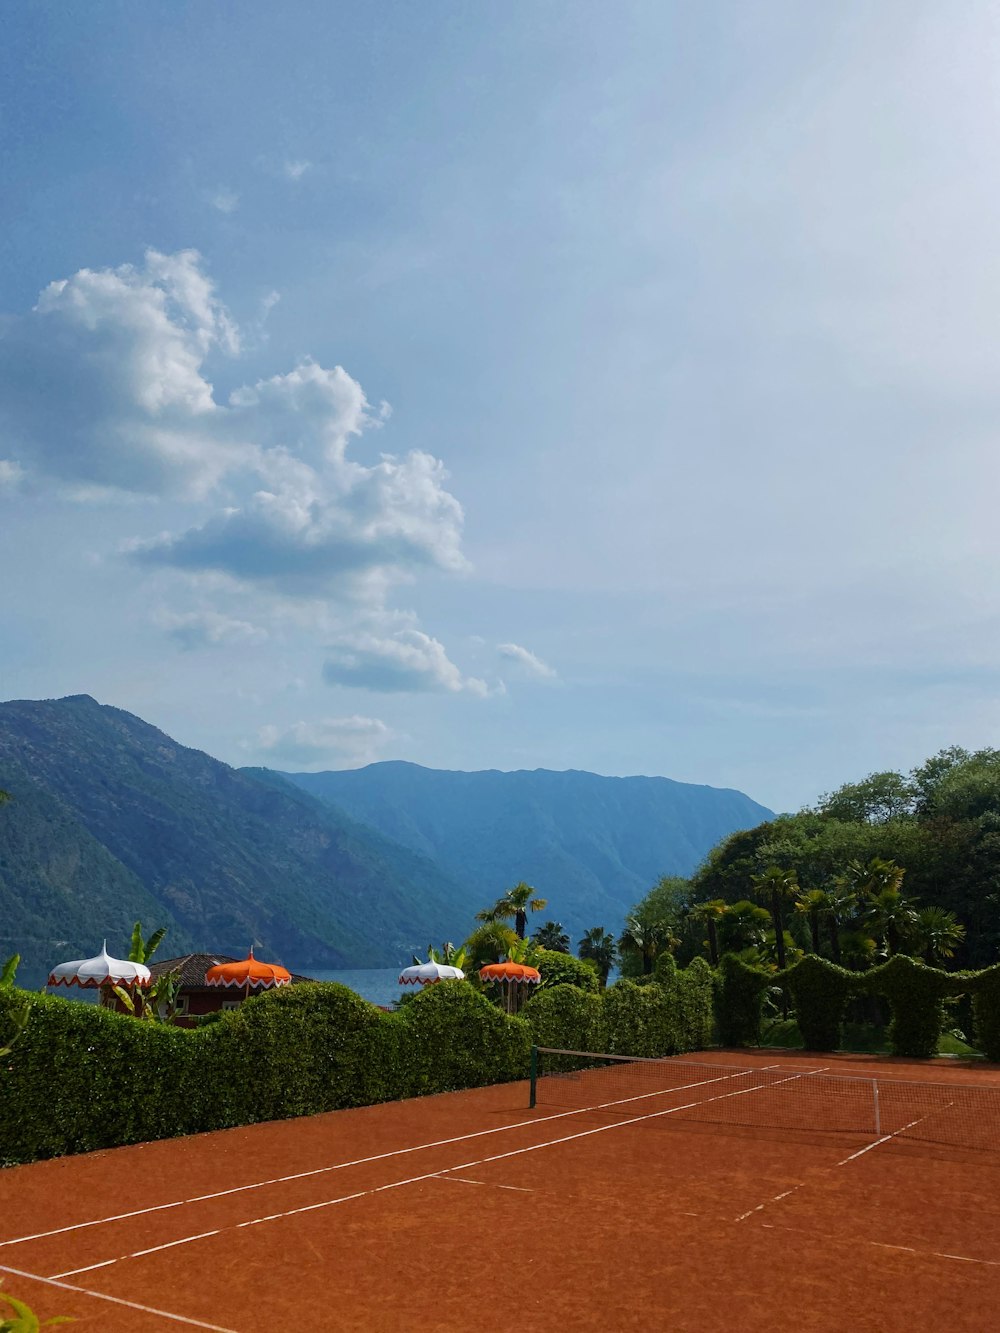 a tennis court with mountains in the background